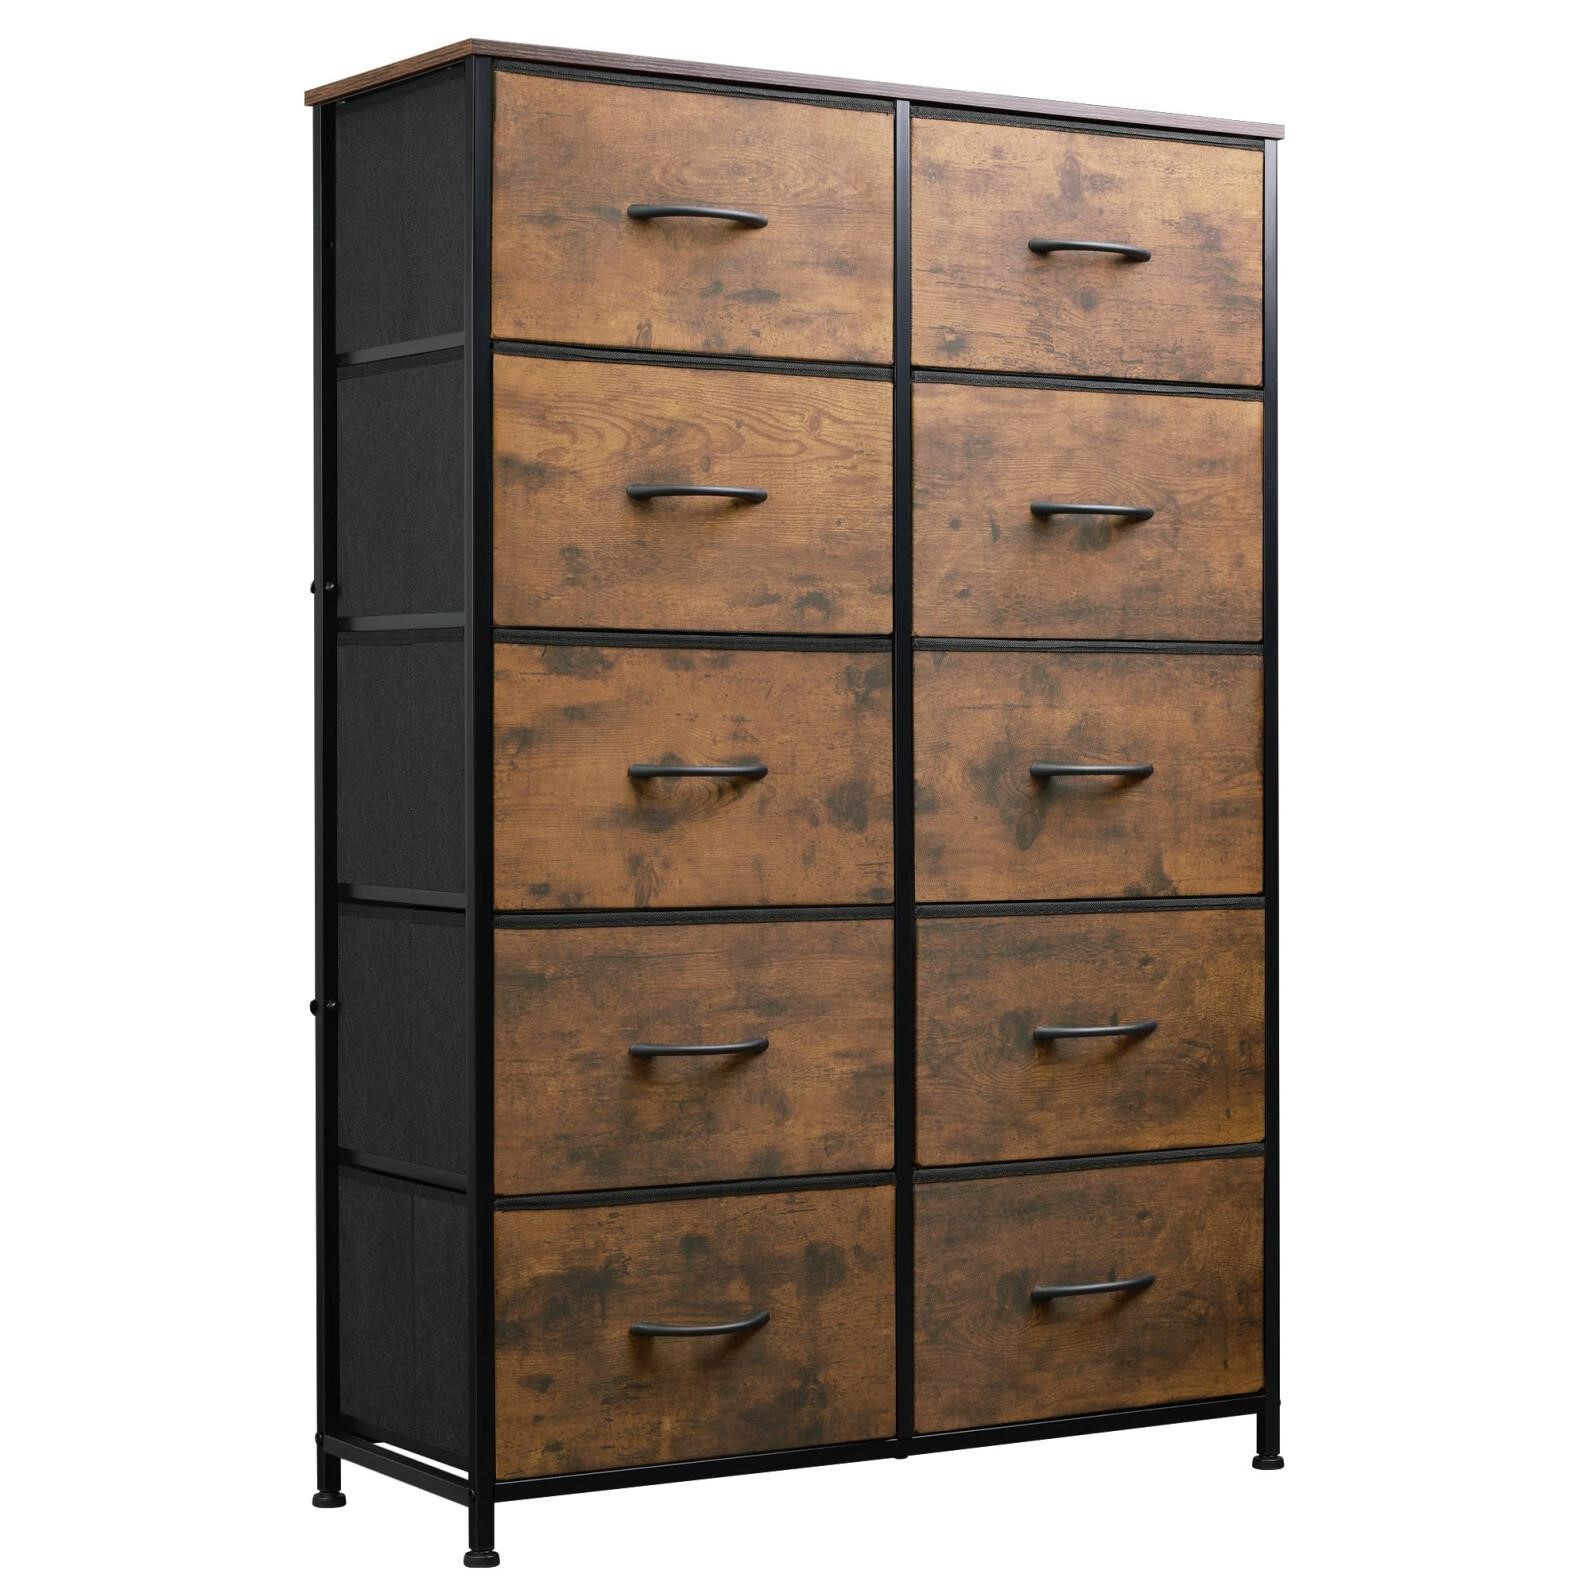 WLIVE Tall Dresser for Bedroom with 10 Drawers, Ch